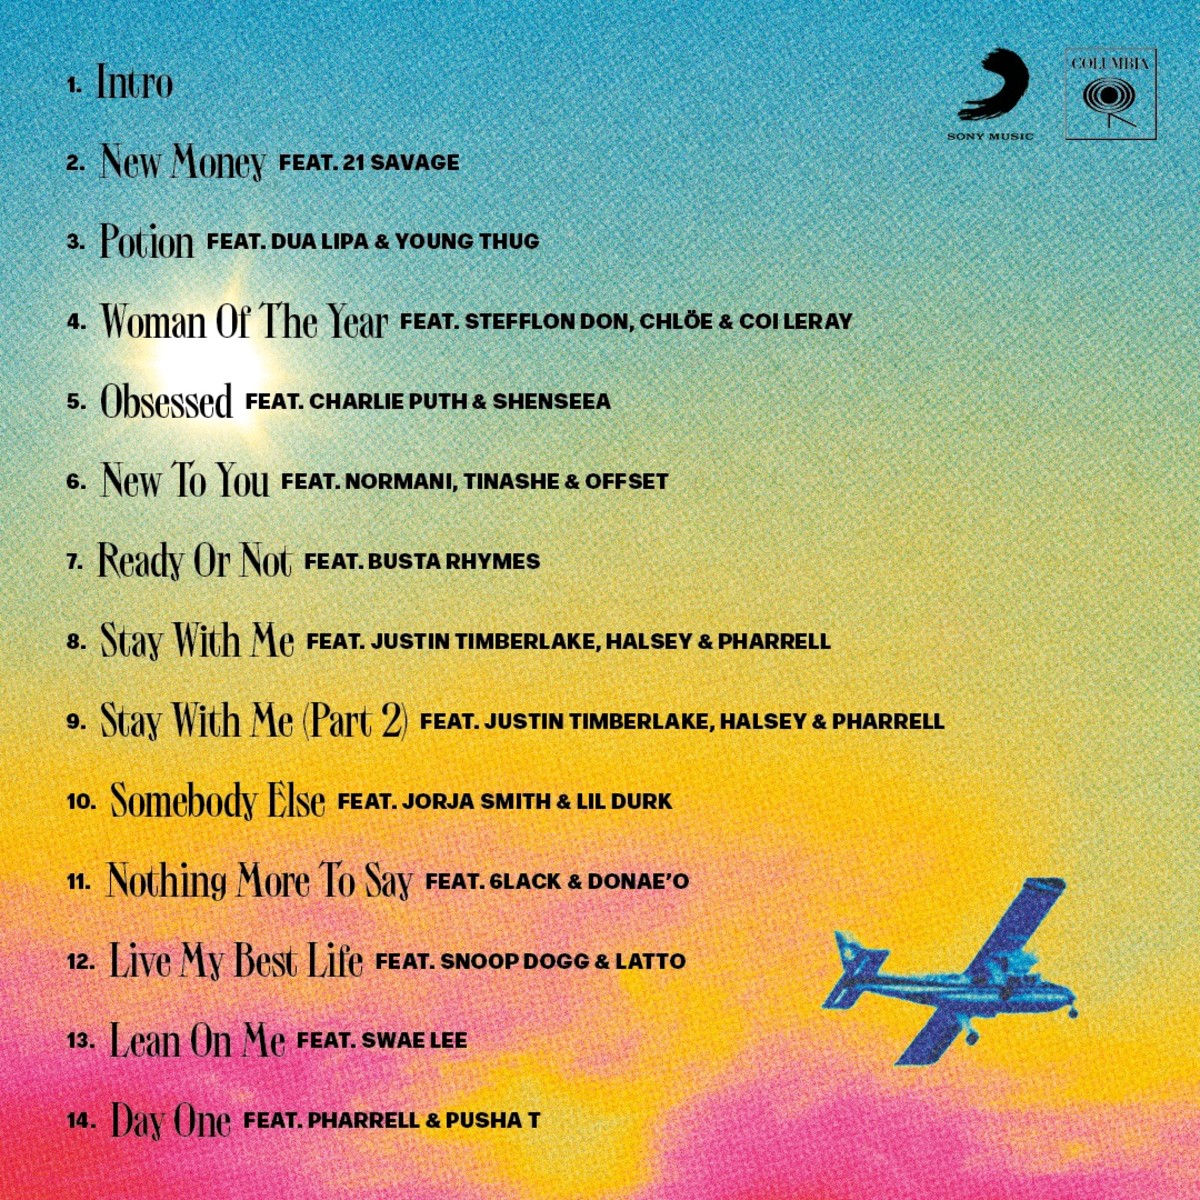 The tracklist of Calvin Harris' "Funk Wav Bounces Vol. 2" album, which features Justin Timberlake, Halsey, Pharrell, Snoop Dogg, Tinashe and more.